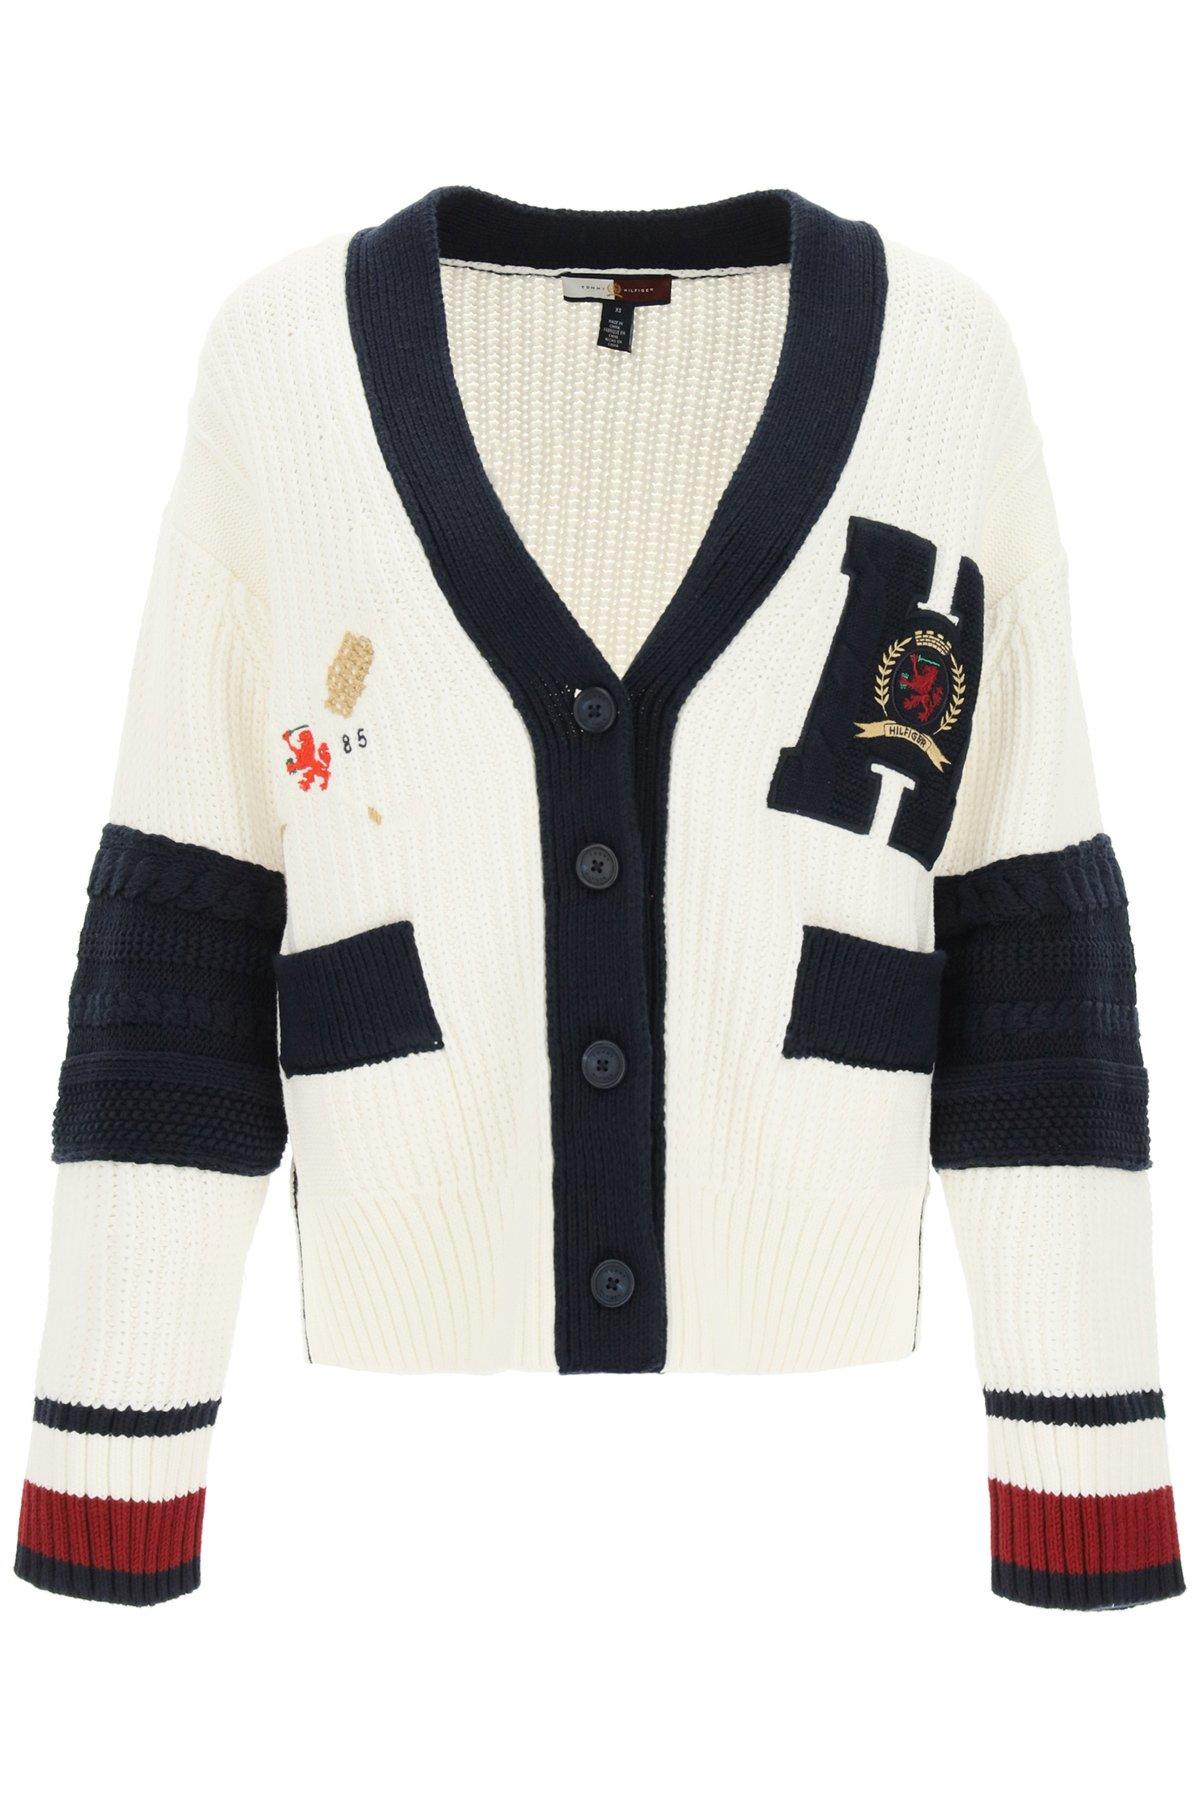 Tommy Hilfiger Letterman Knit Cardigan M Cotton in White,Blue 